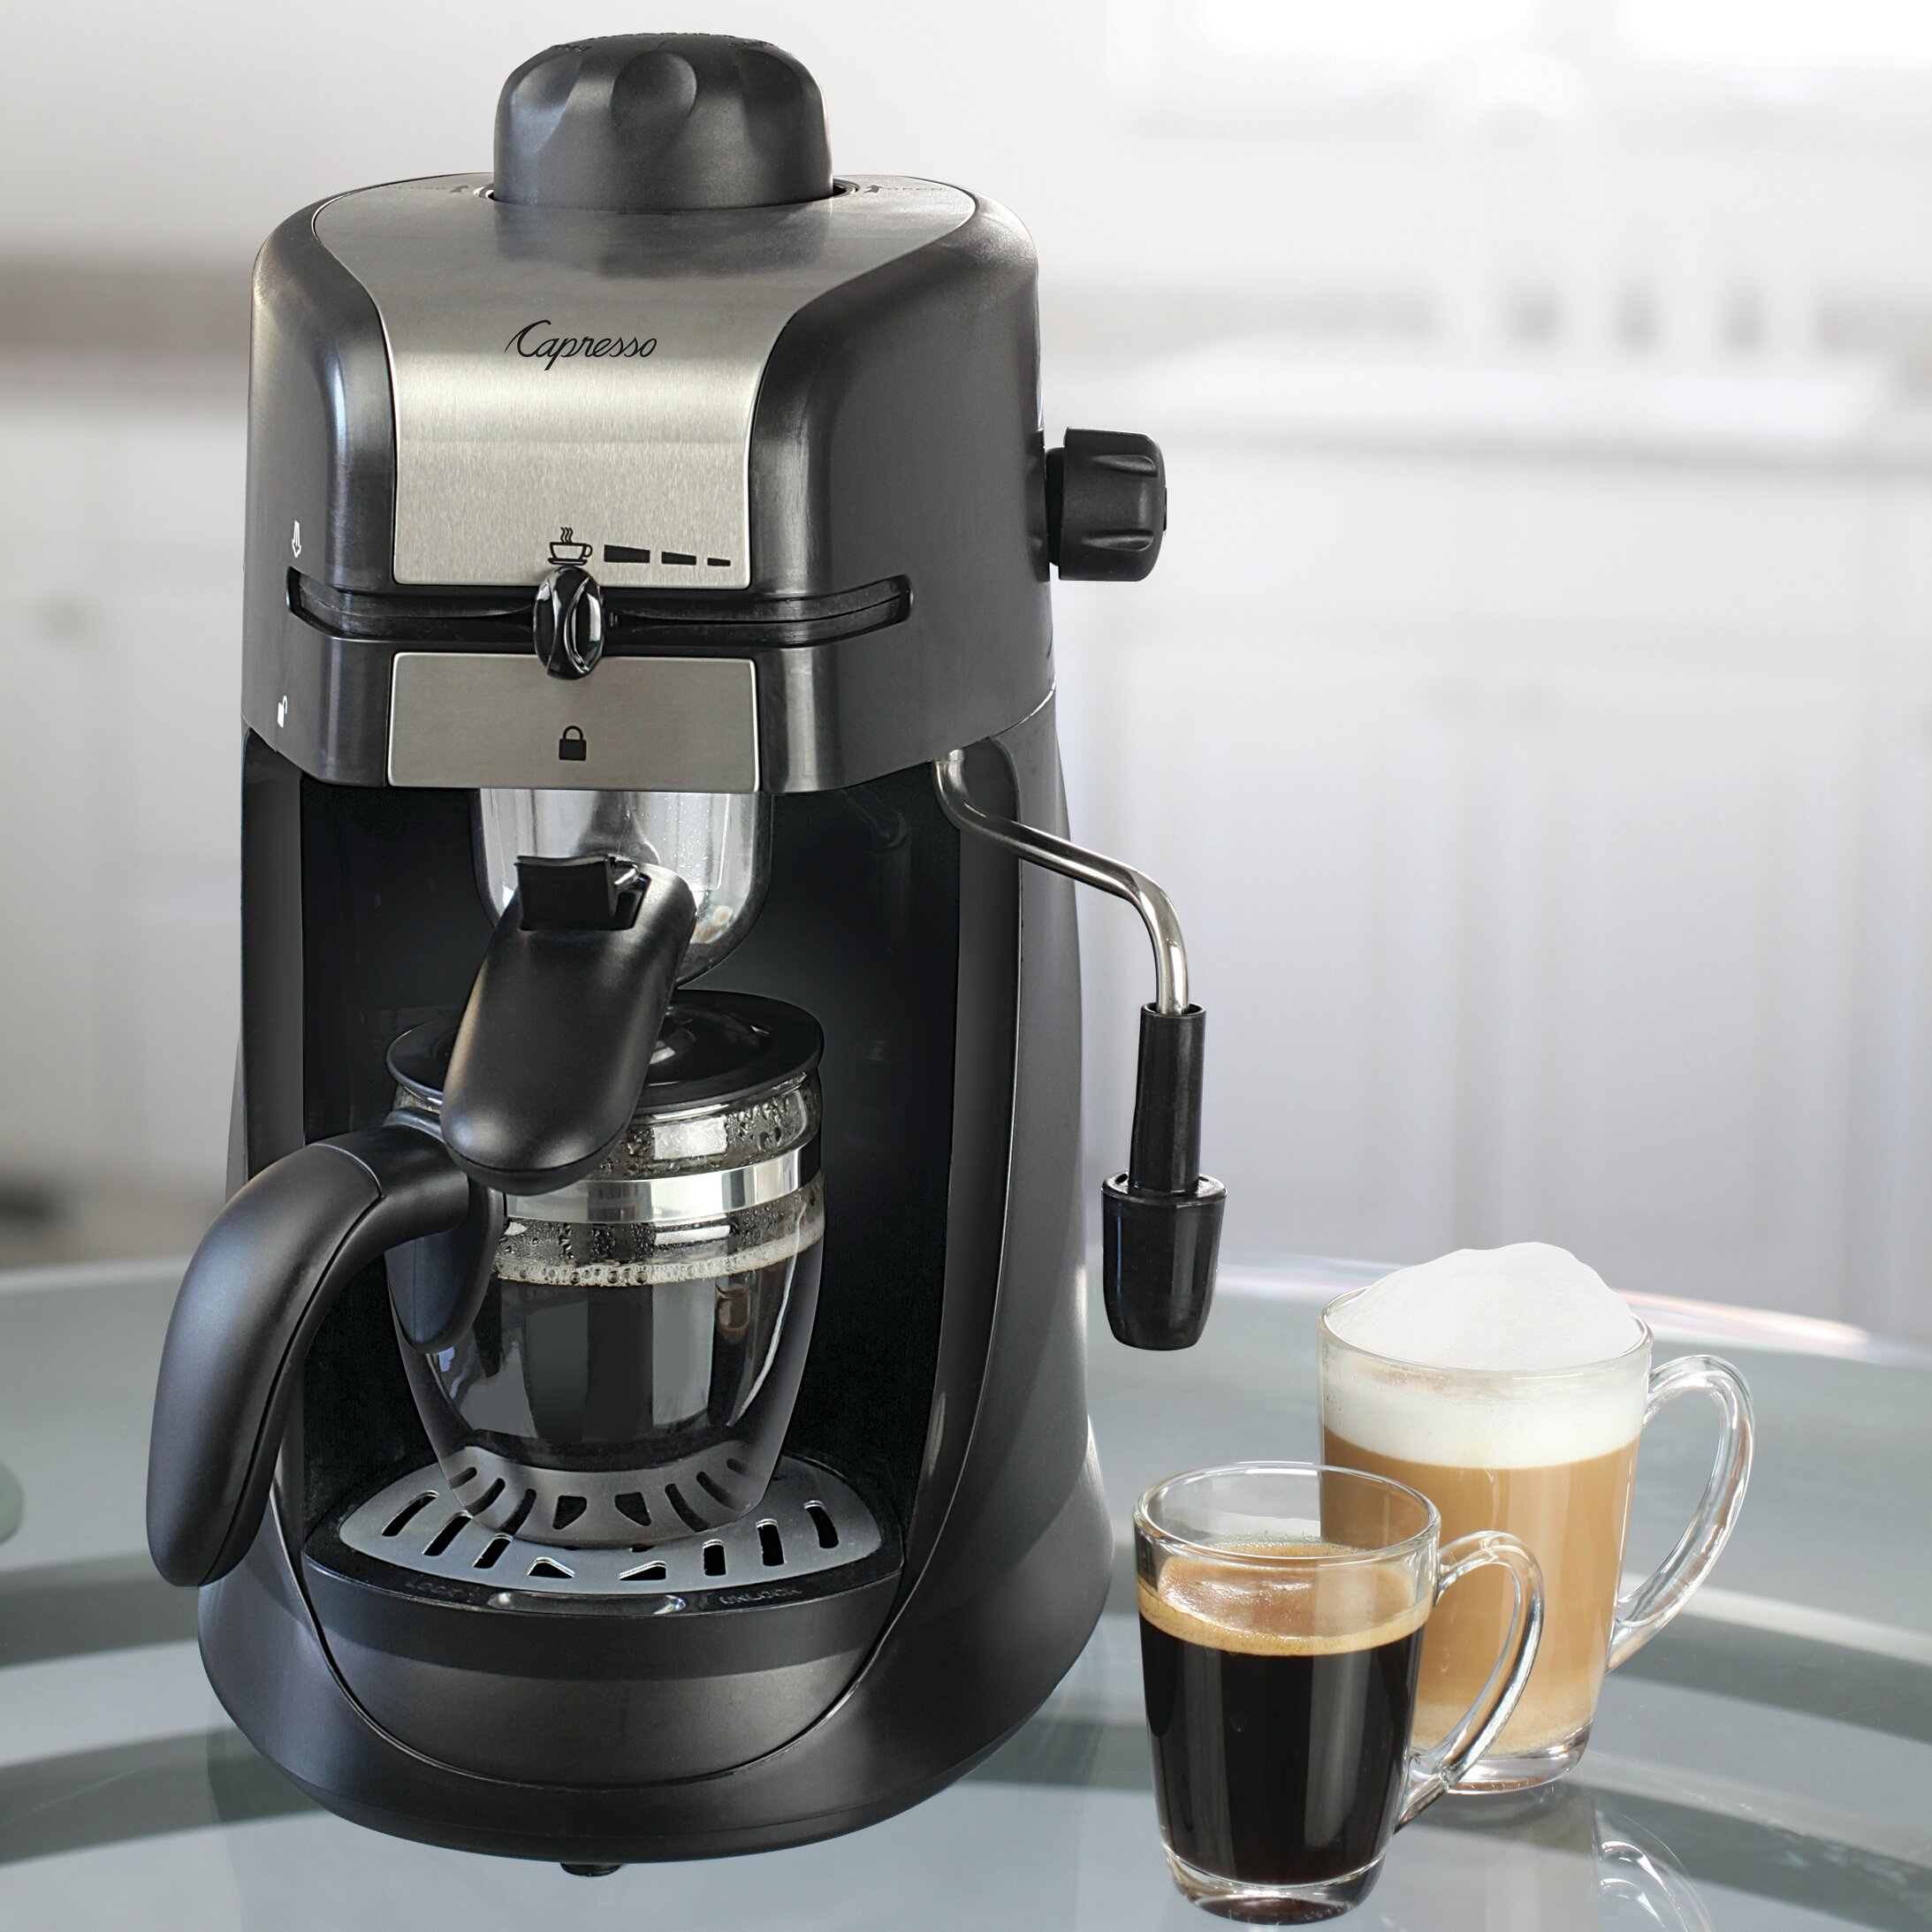 [BIG SALE] Top-Rated Espresso Machines You’ll Love In 2020 | Wayfair